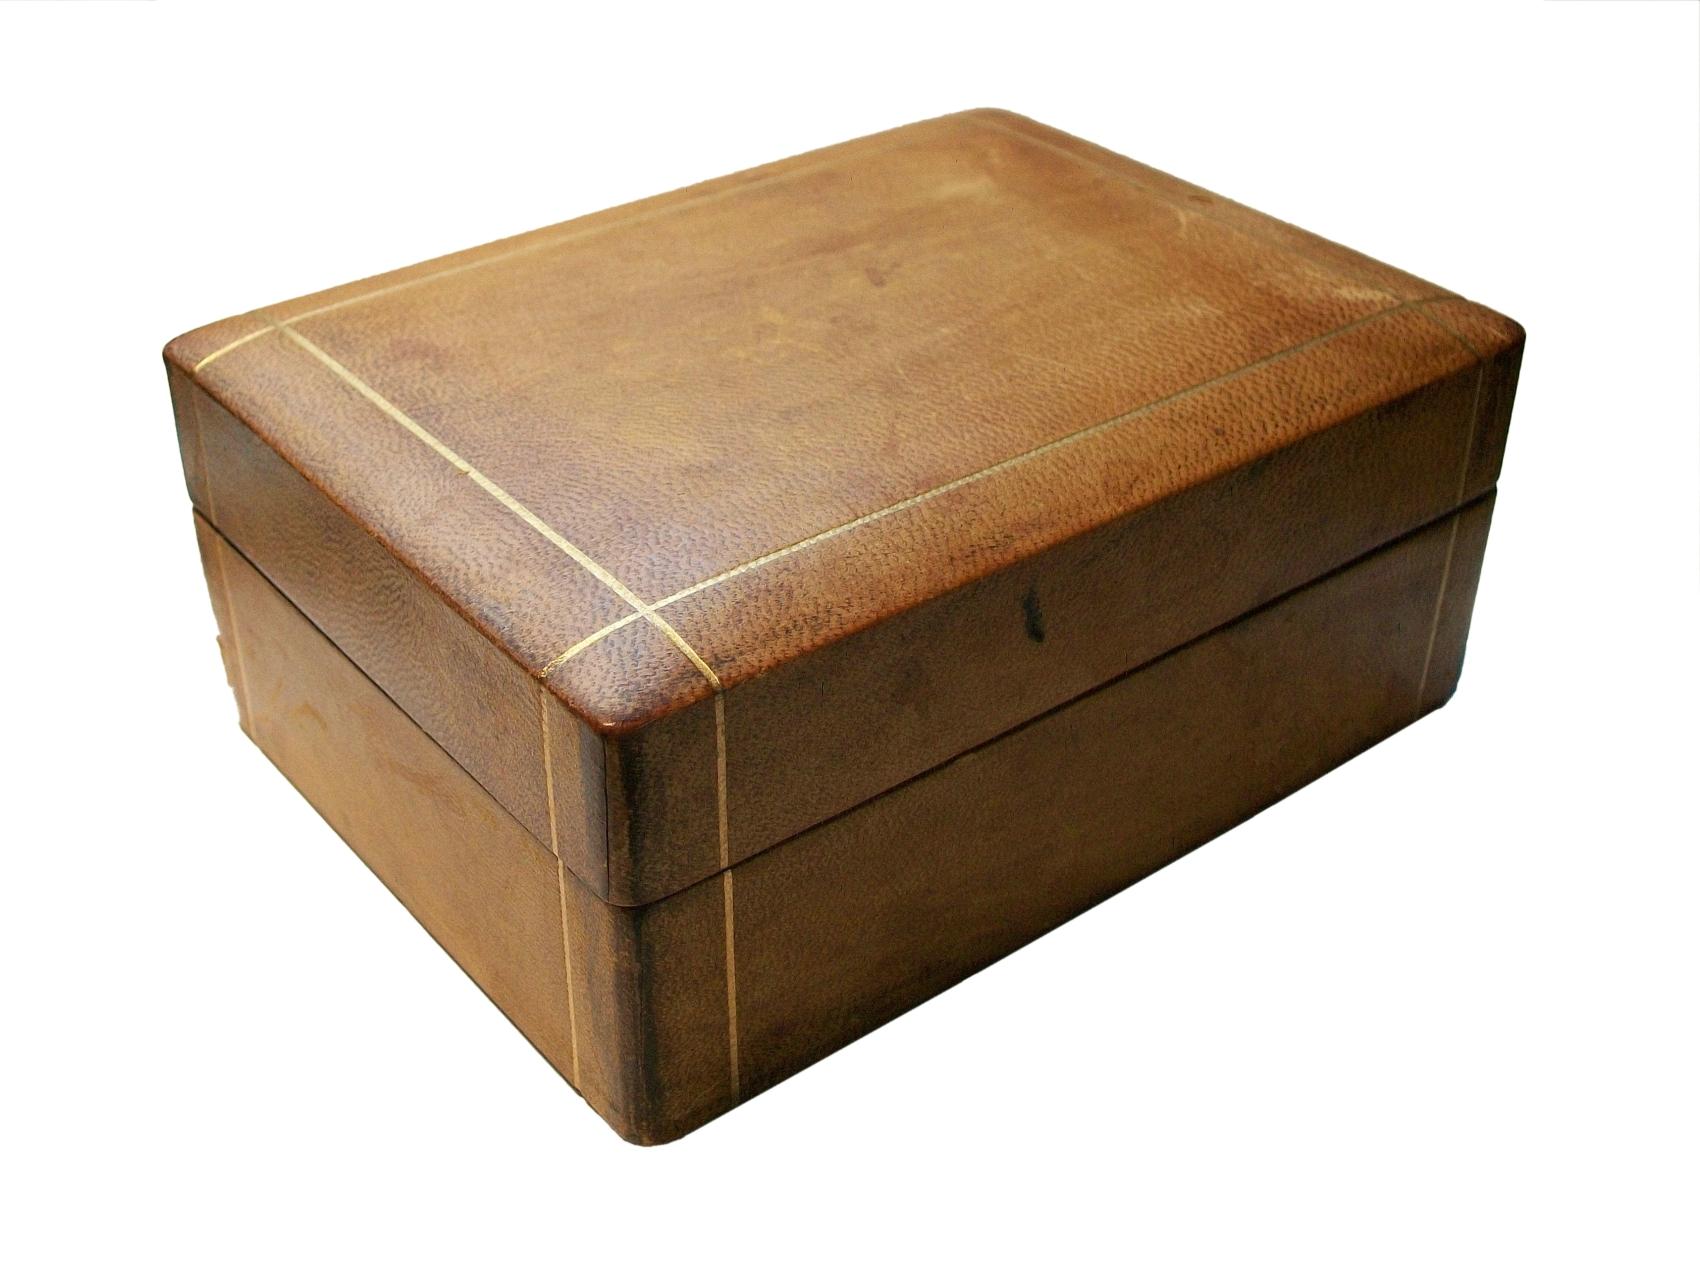 Mid Century kid leather box with gilt details - wood lined - moire fabric to the base - unsigned - very faint 'Made in Italy' blind stamp to the base - circa 1950's.

Excellent vintage condition - wonderful aged patina - no loss - no damage - no